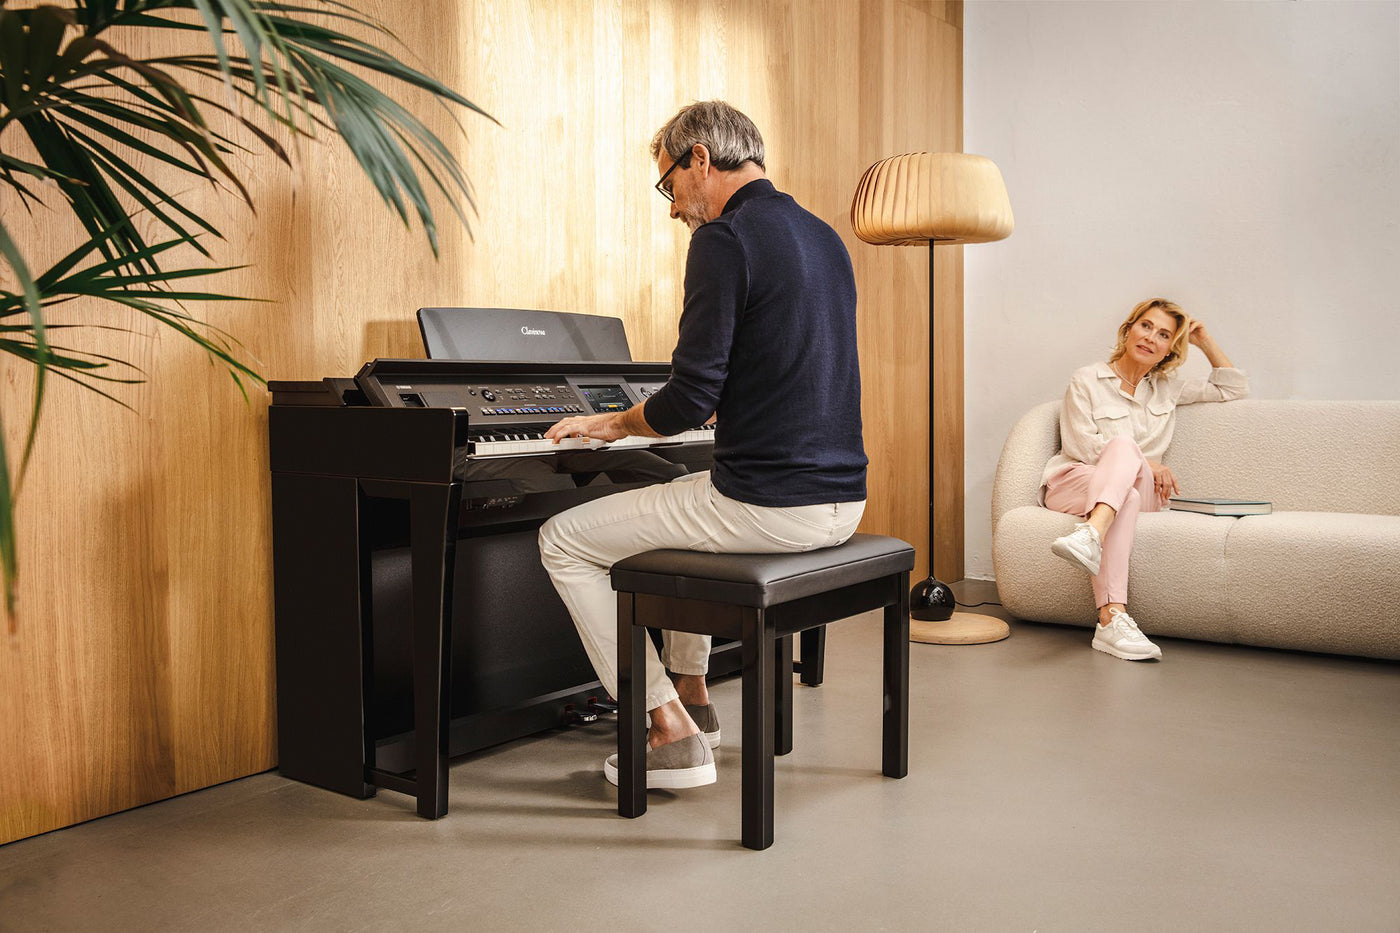 A man playing a modern digital piano with a woman sitting on a couch listening in a well-lit living room with wooden flooring and a warm ambiance.